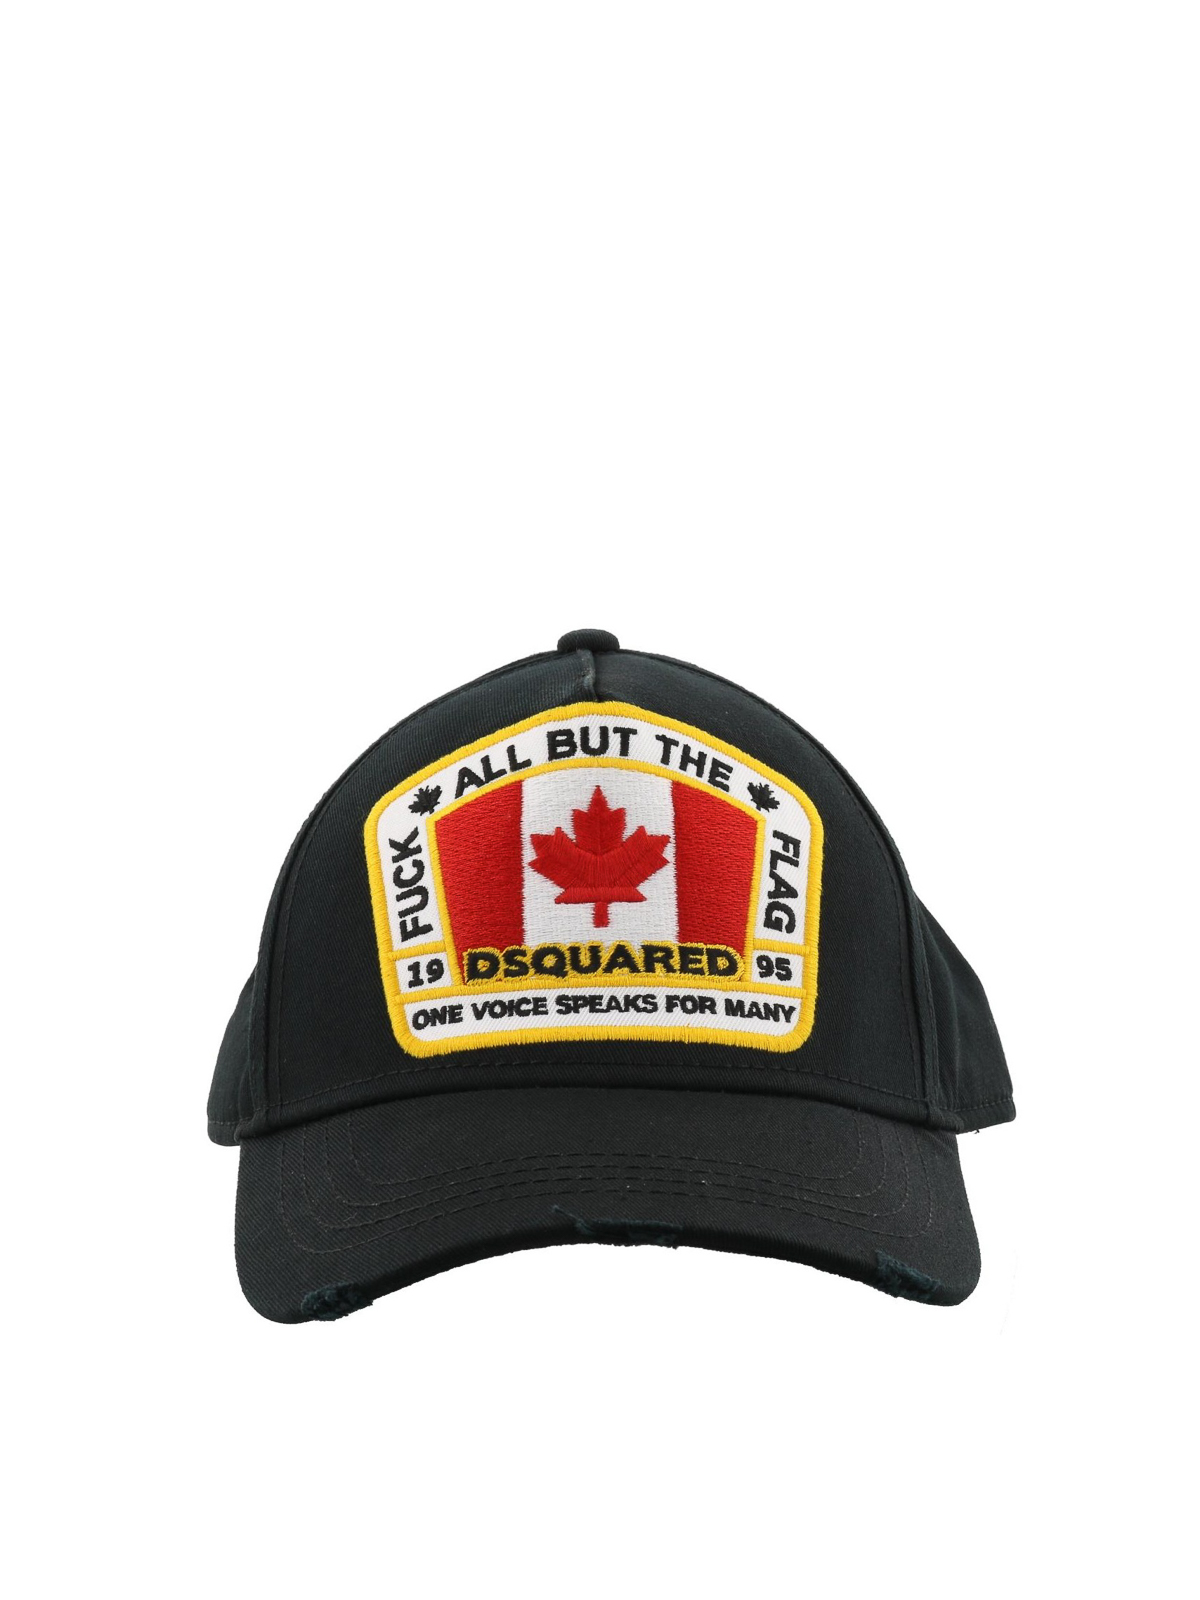 dsquared cap all but the flag